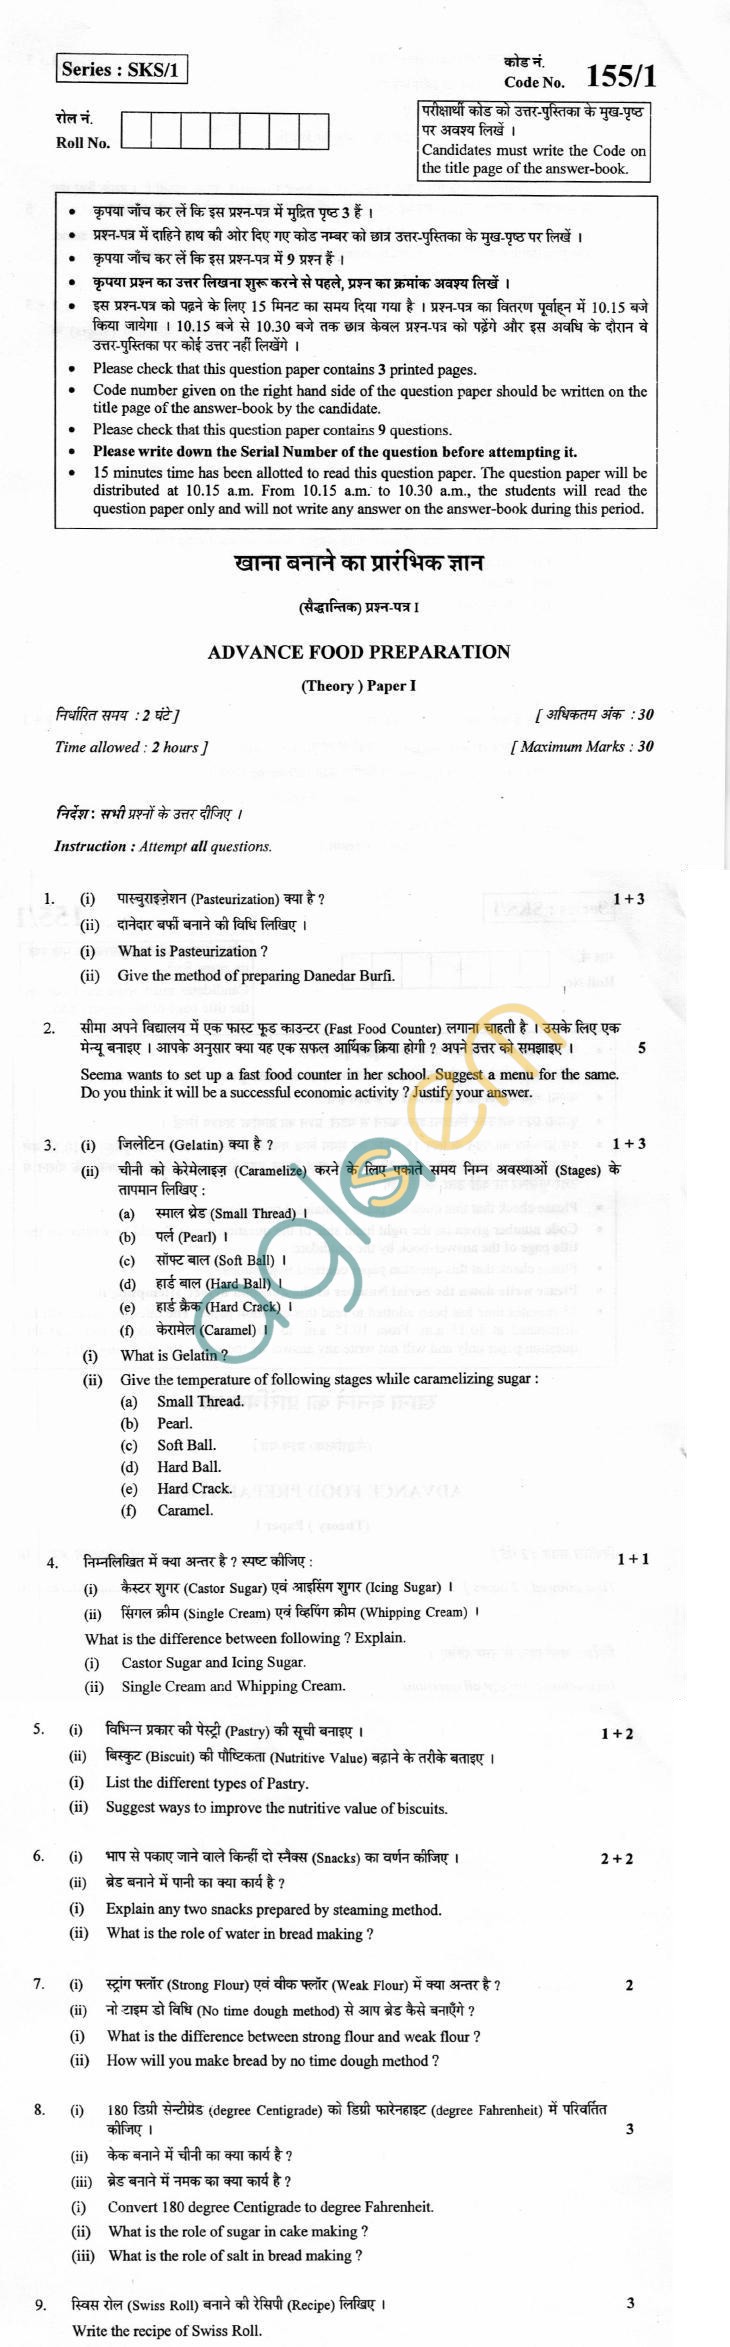 CBSE Board Exam 2013 Class XII Question Paper - Advance food Preperation